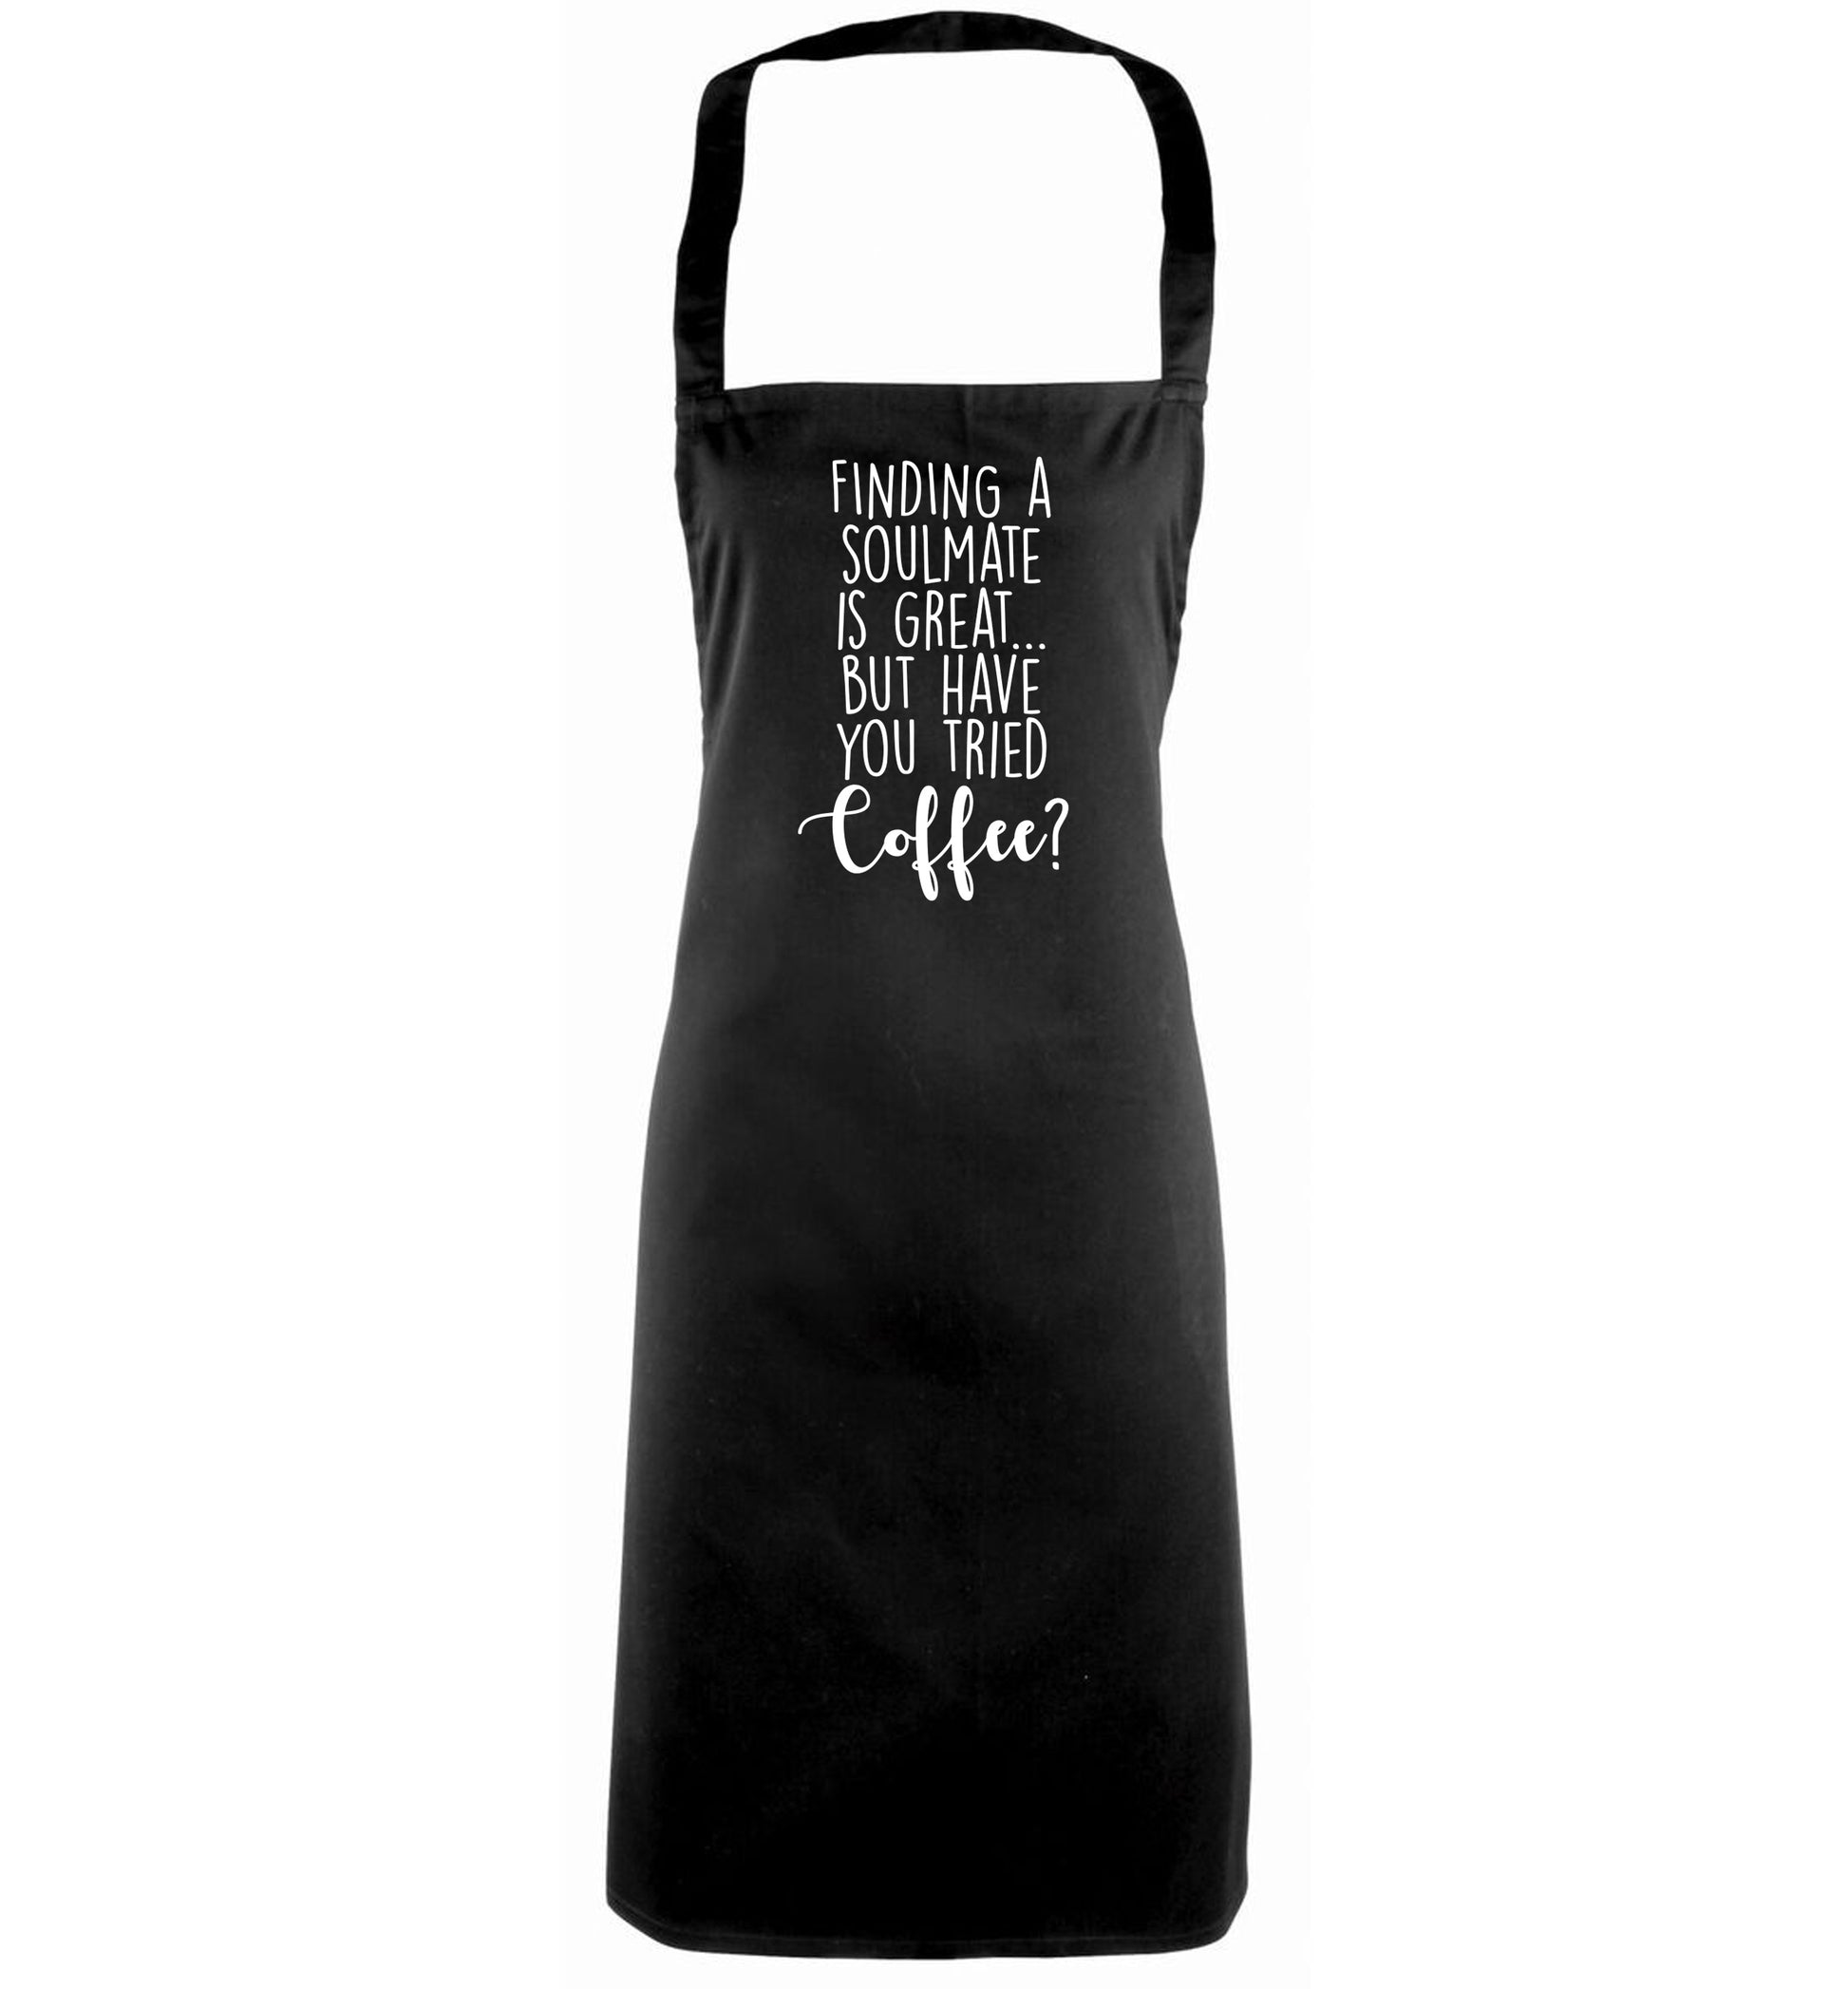 Finding a soulmate is great but have you tried coffee? black apron